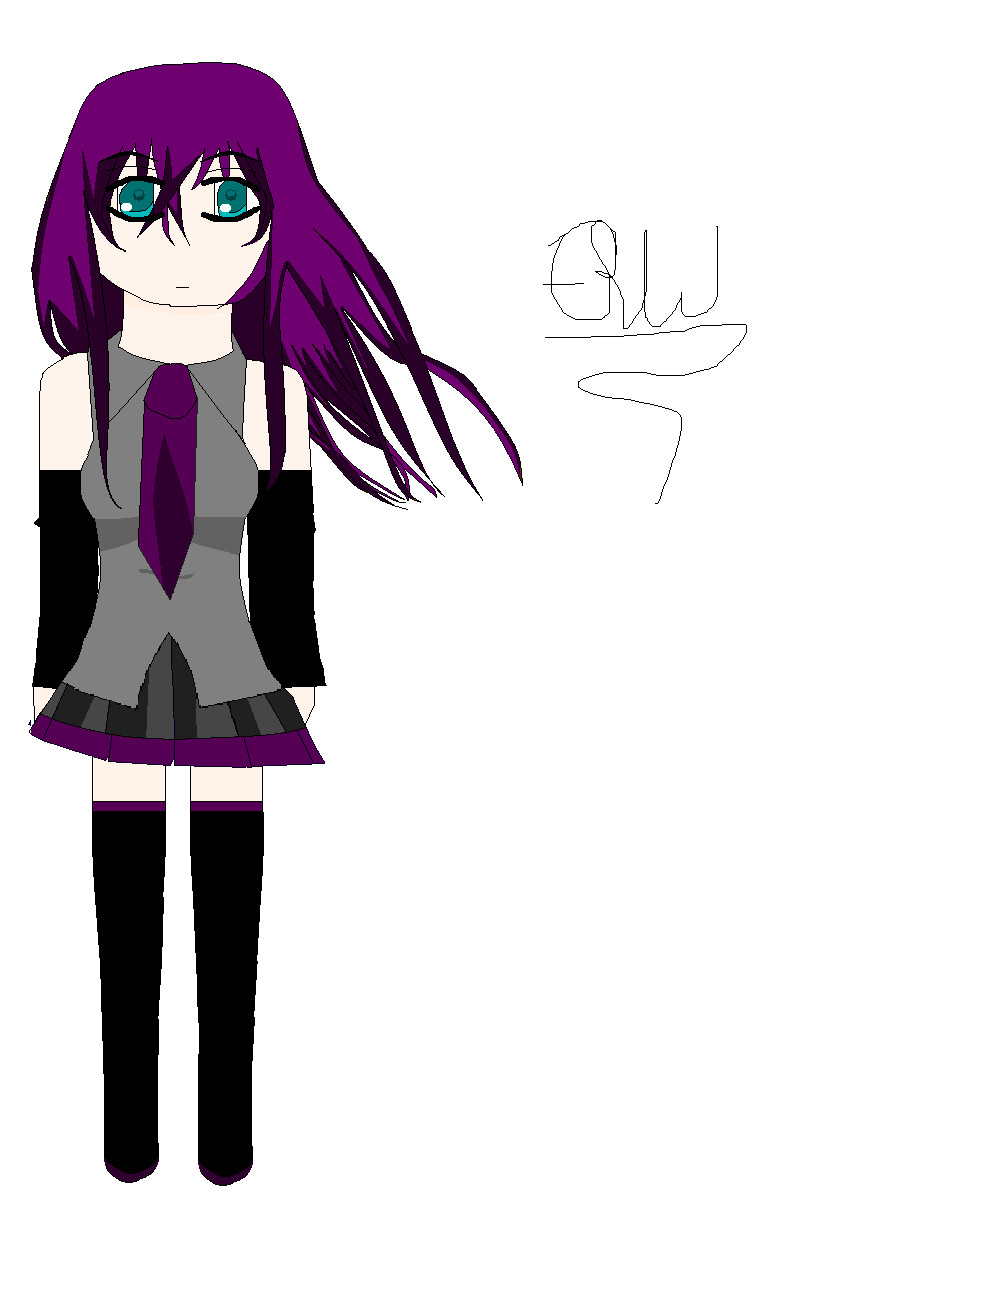 Me as a  Vocaloid character ^^ by AnimeFreak778